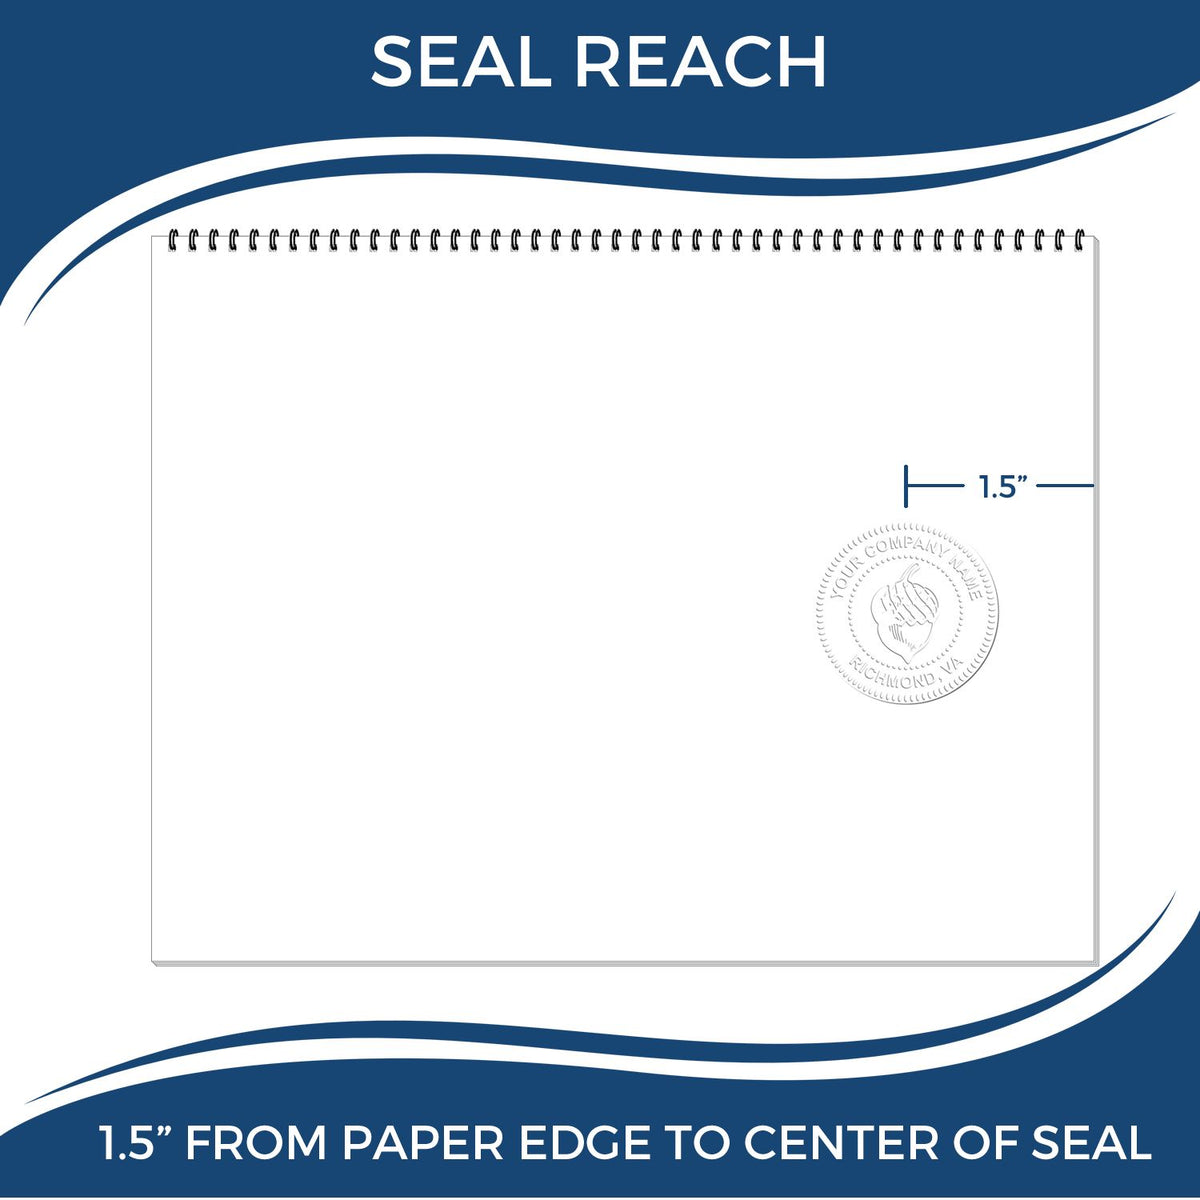 An infographic showing the seal reach which is represented by a ruler and a miniature seal image of the State of Mississippi Architectural Seal Embosser